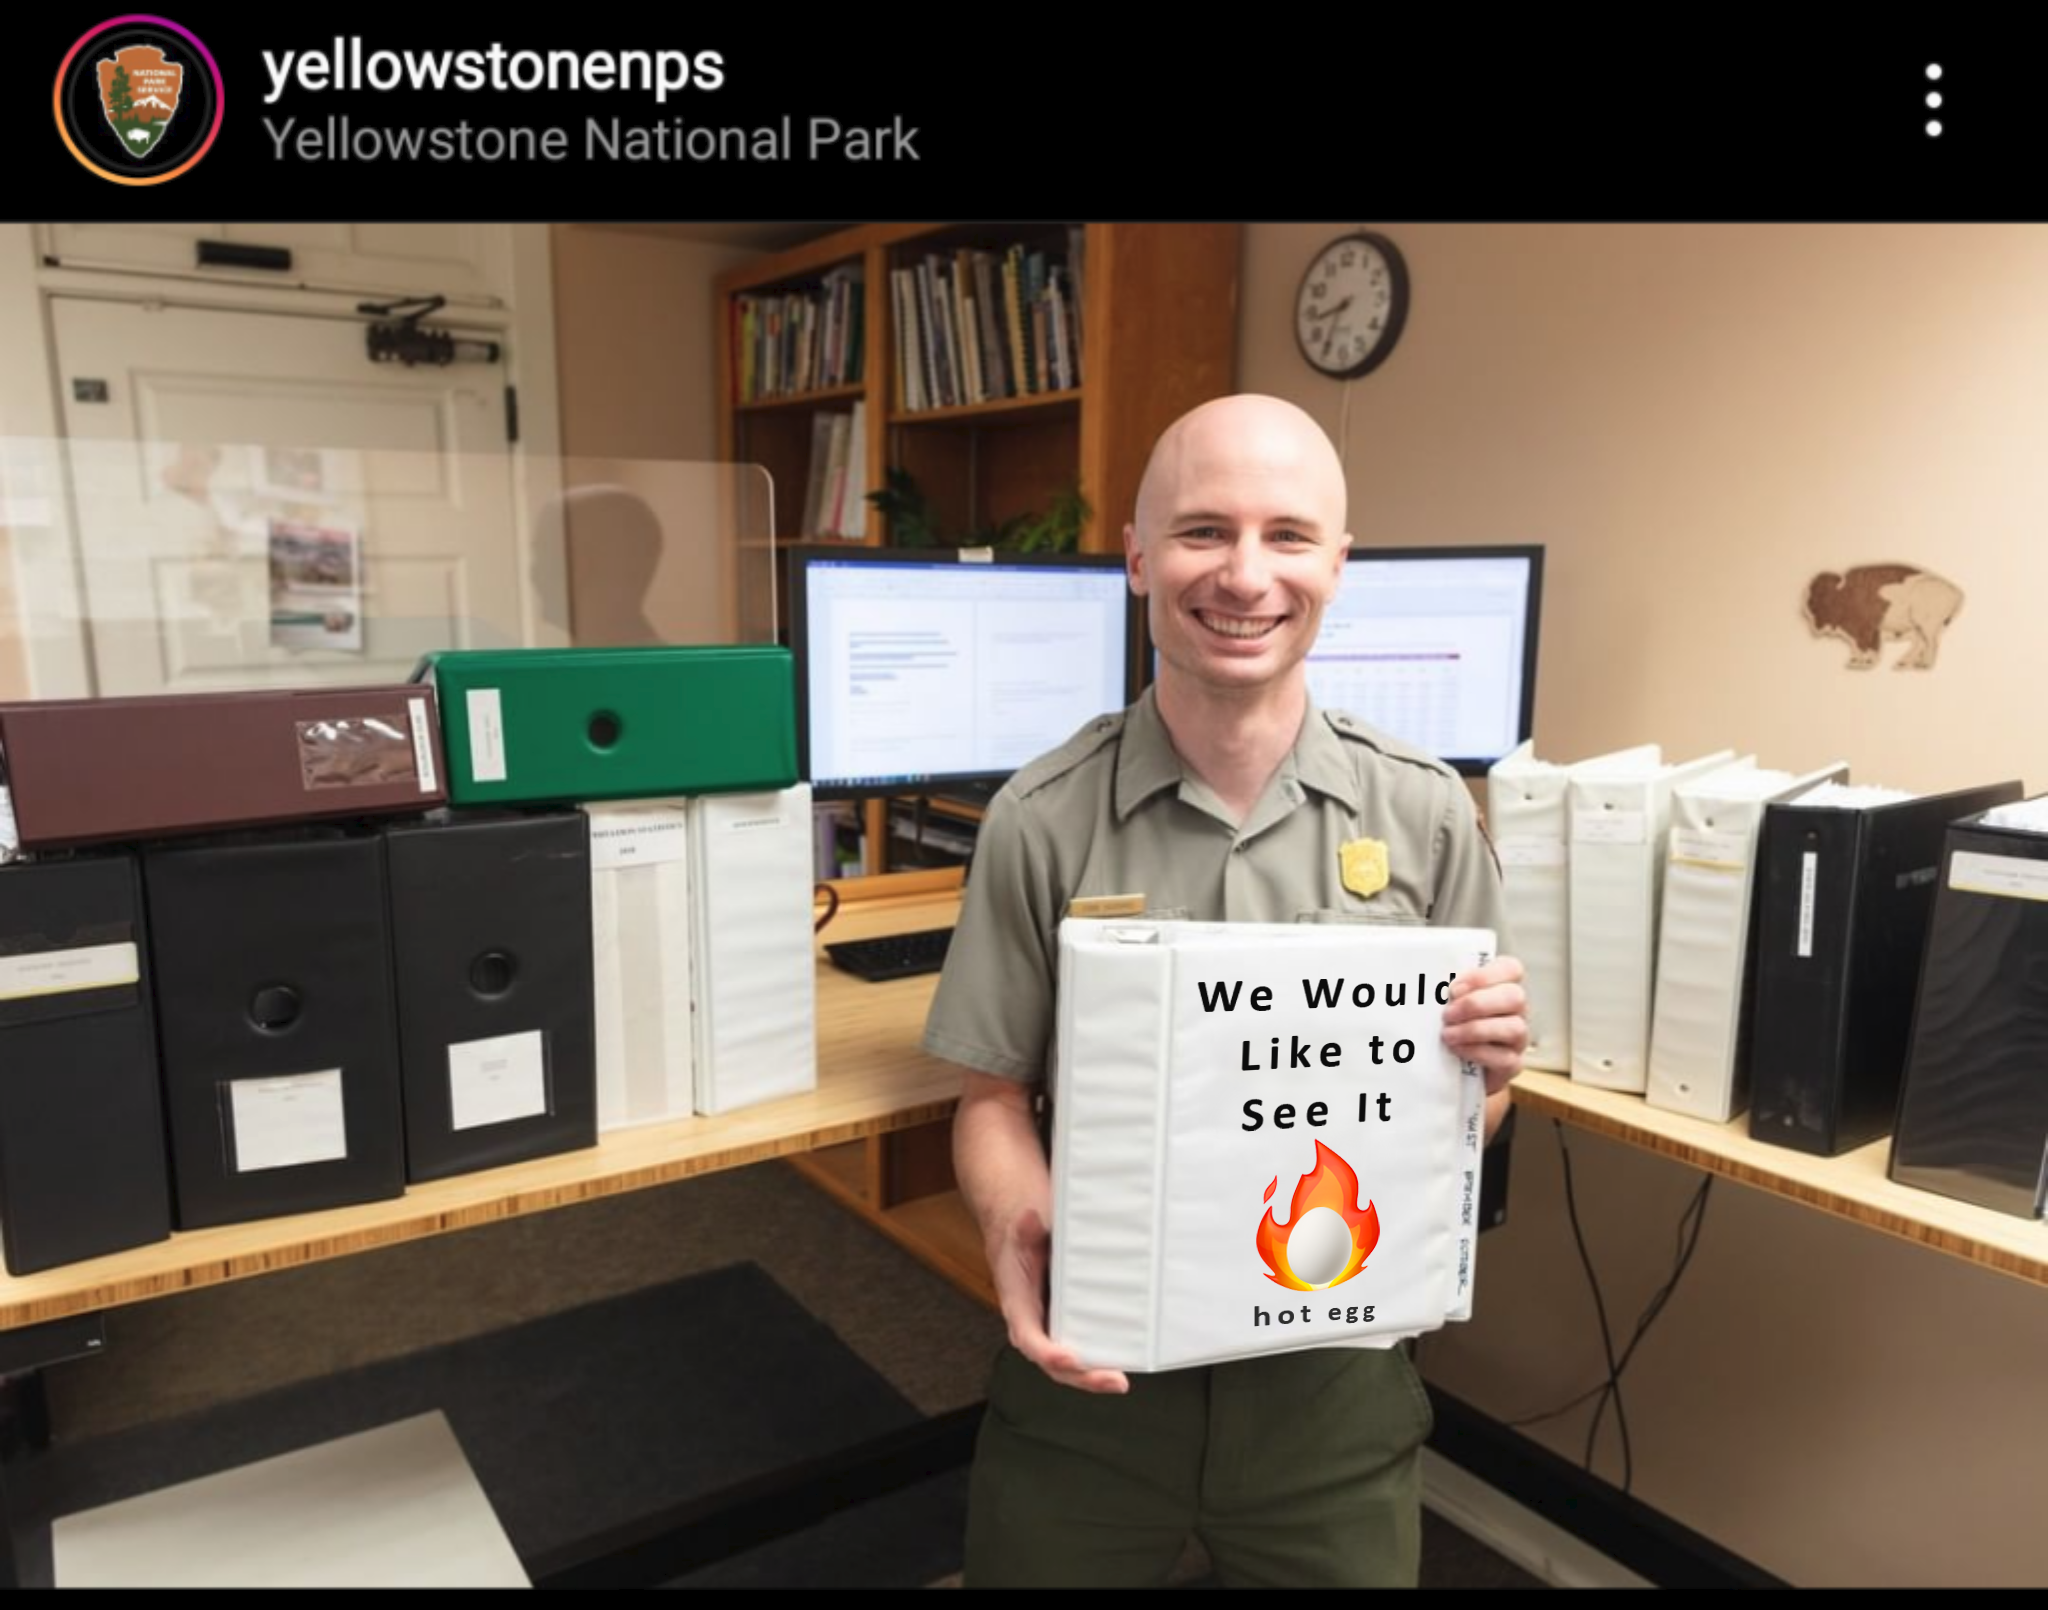 An instagram post from yellowstonenps, a park ranger holds a binder. "Hot Egg We Would Like to See It"